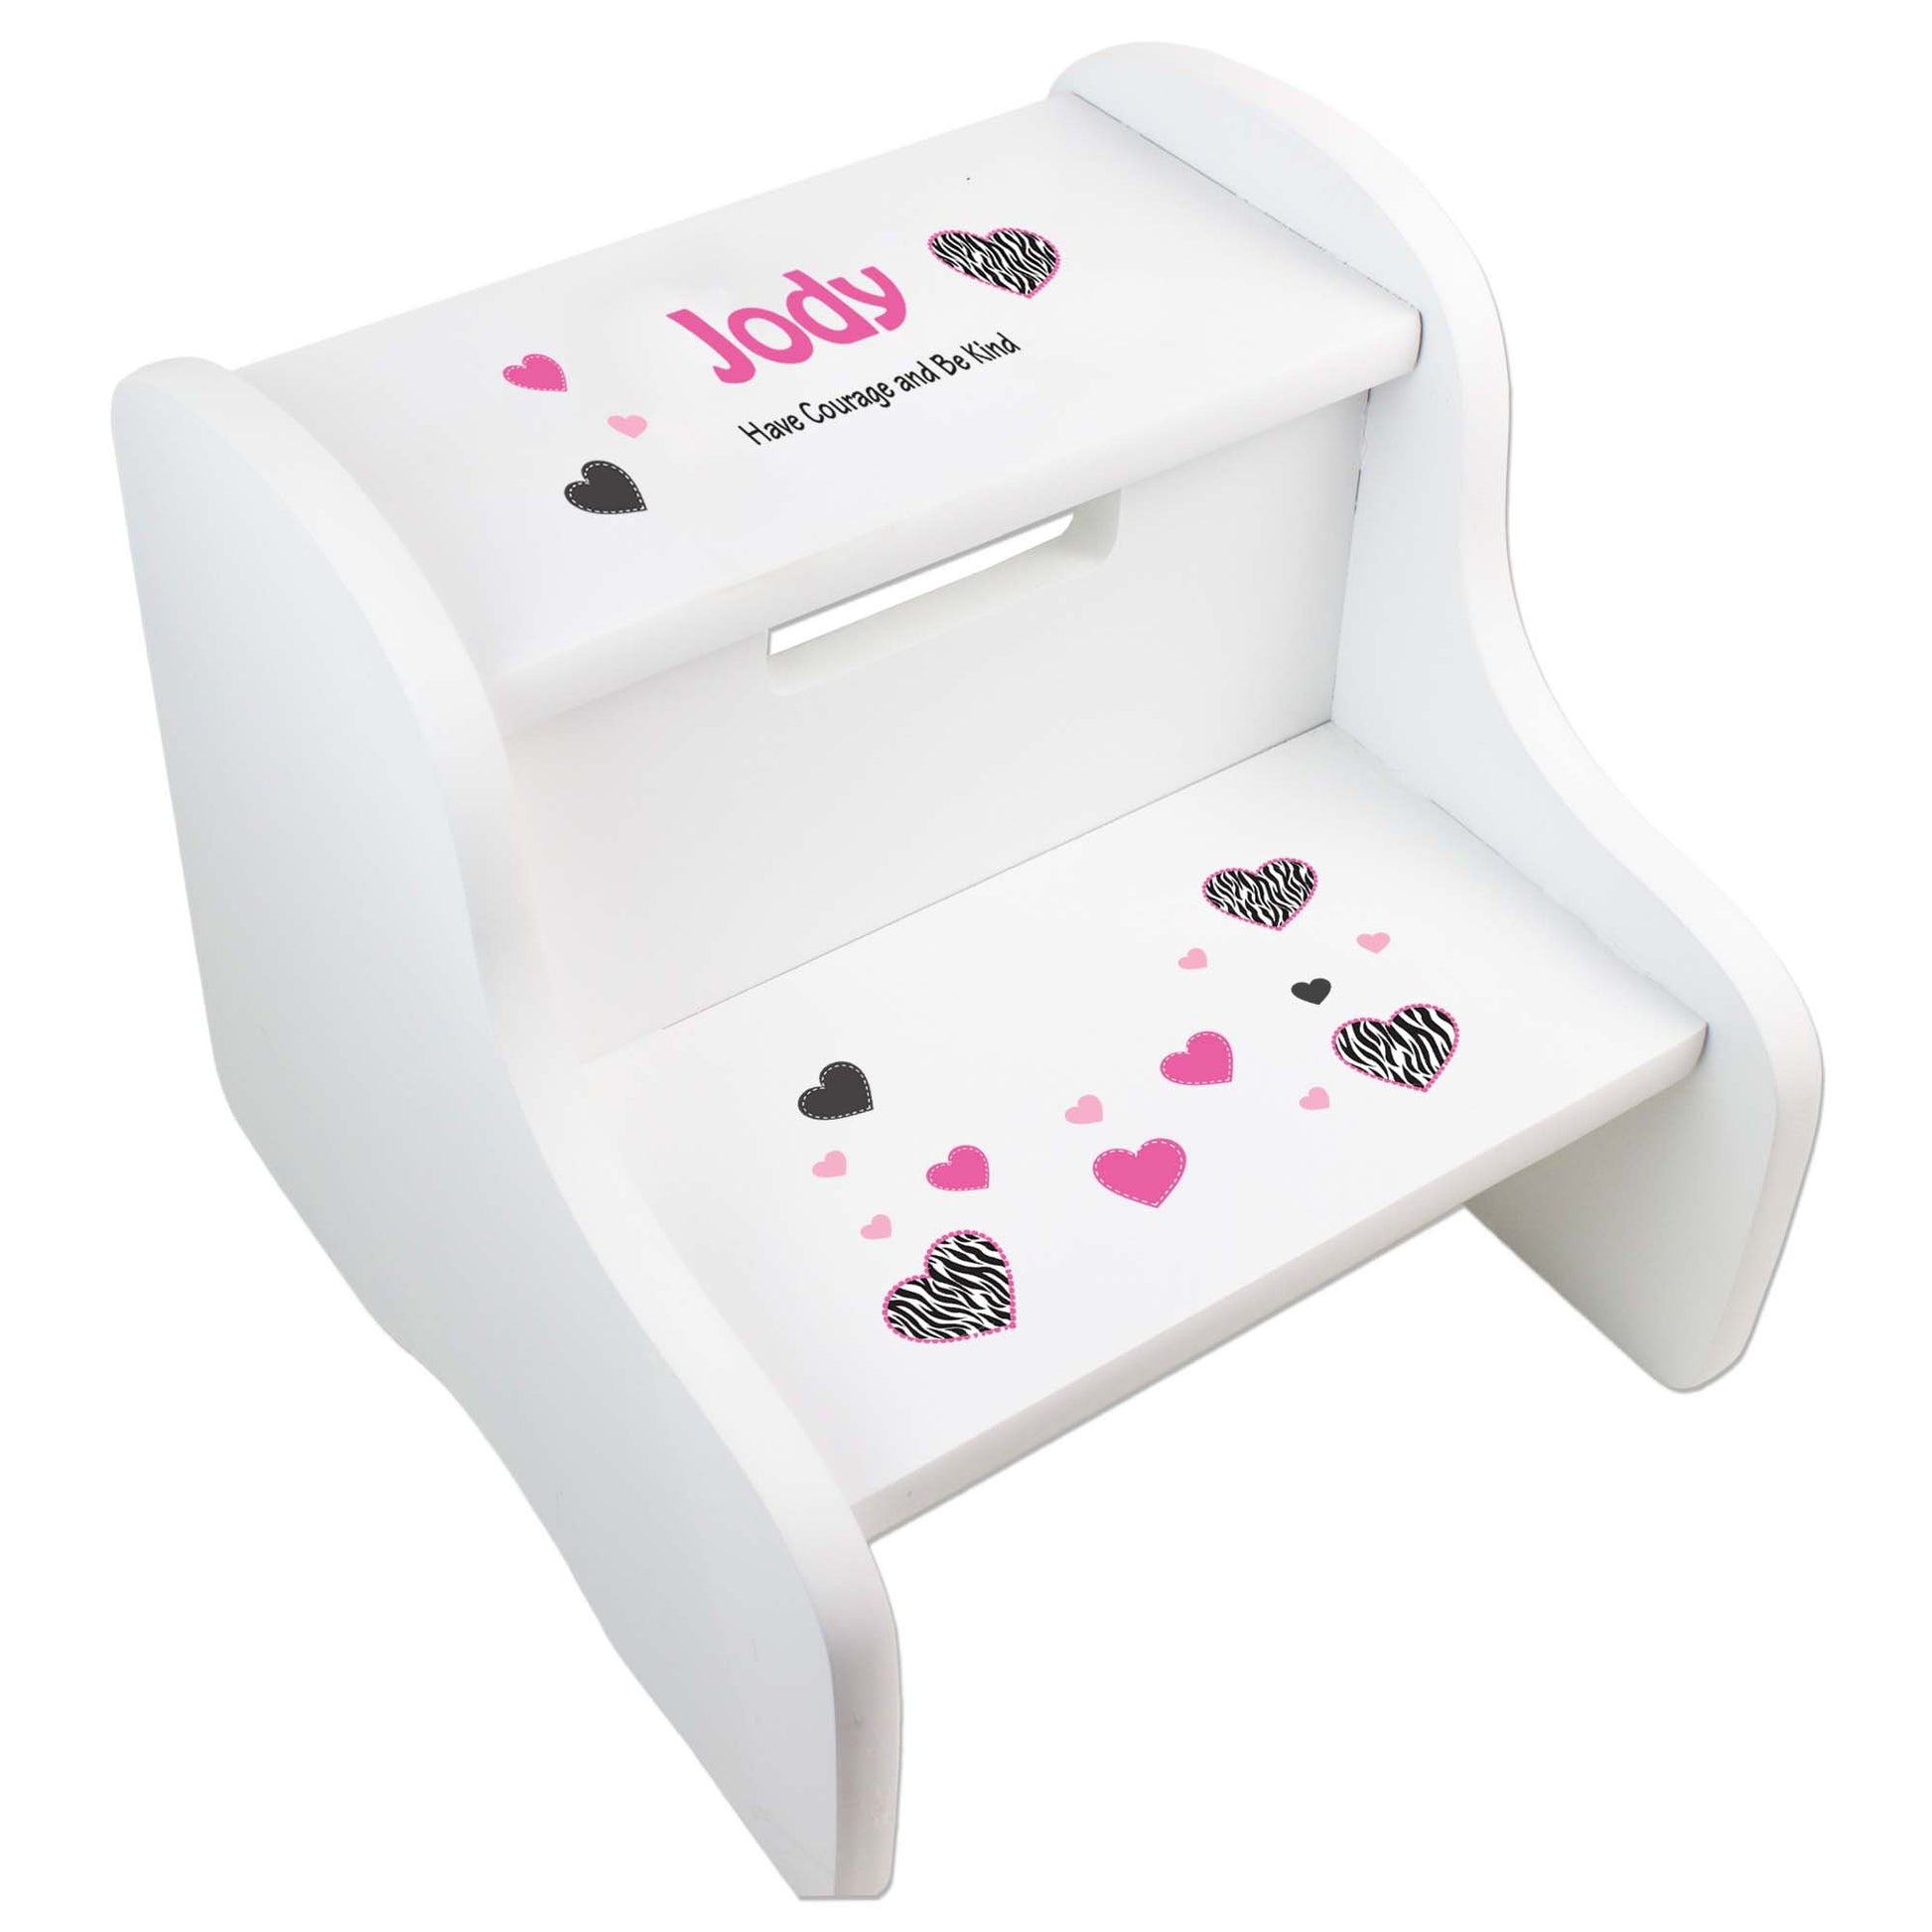 Personalized White Step Stool With Sweet Treats Candy Design